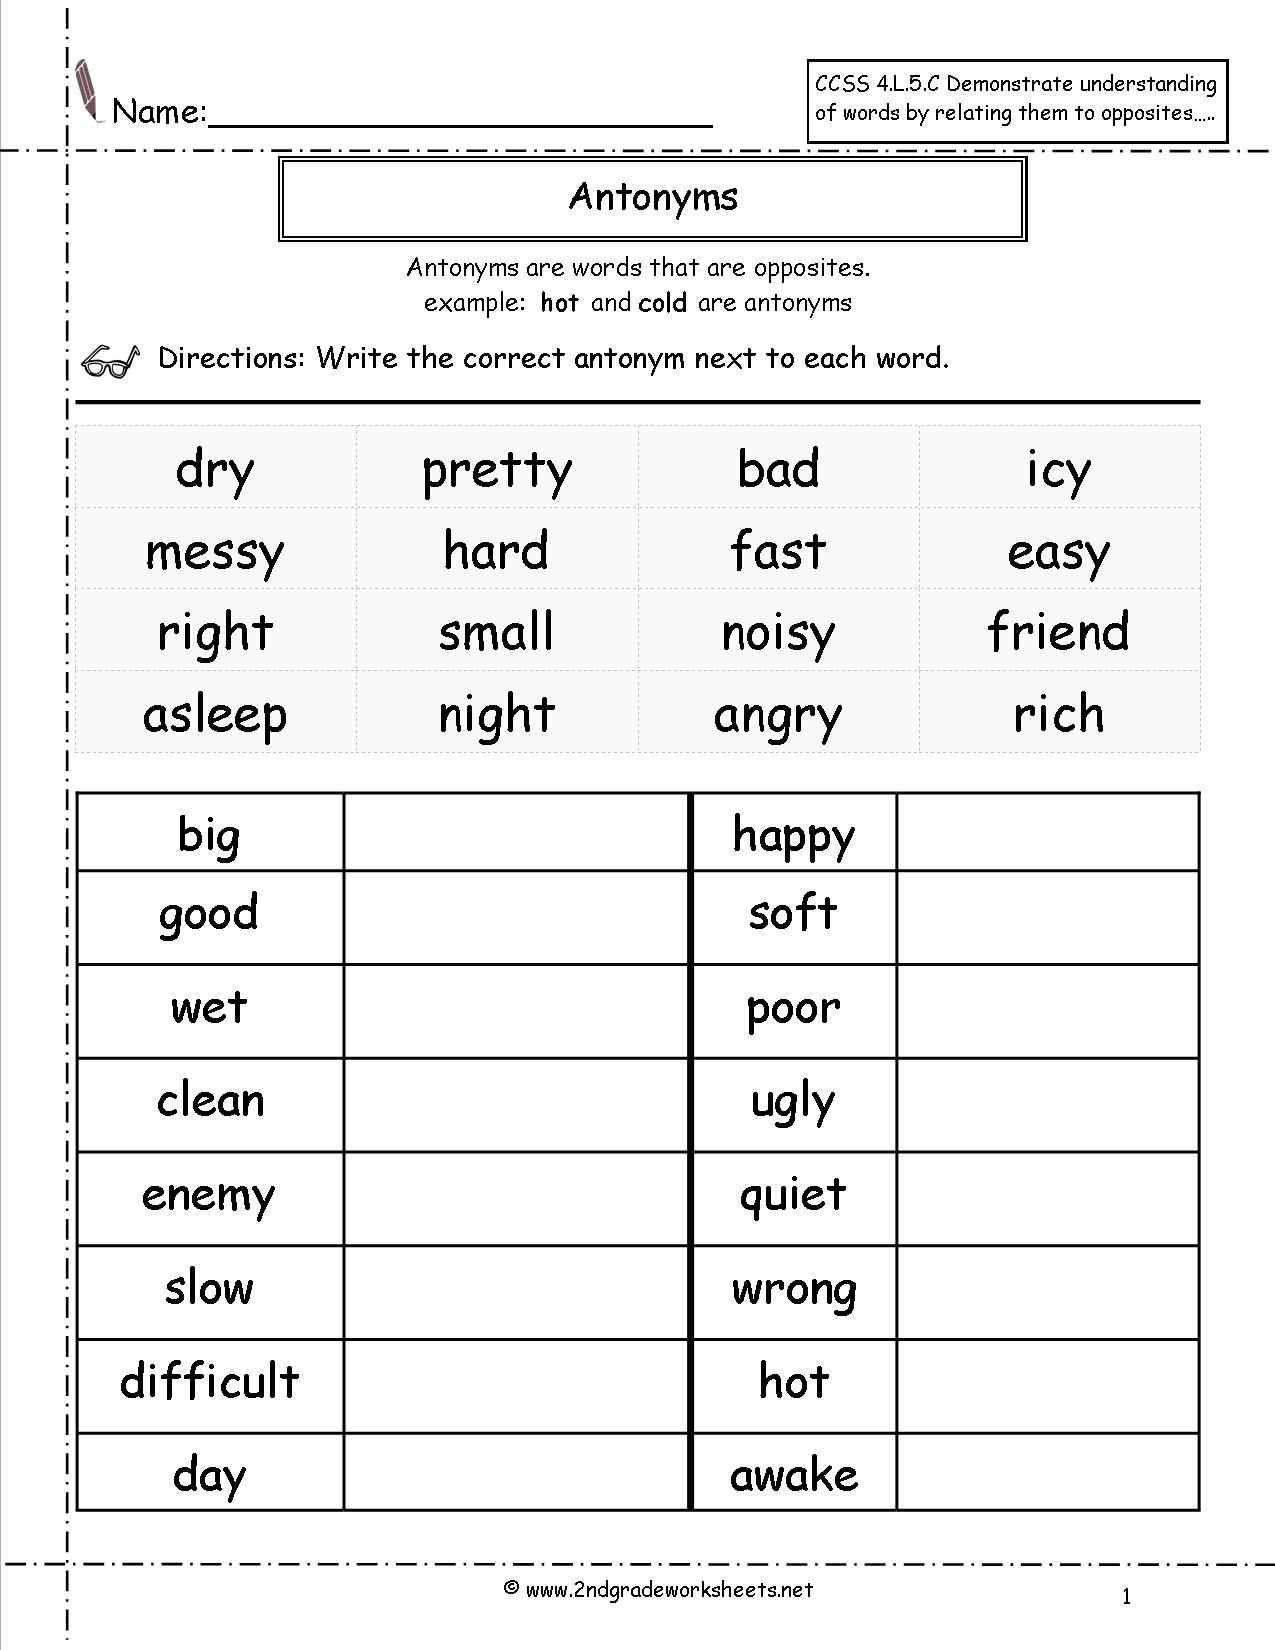 Free Synonym Worksheets For 2nd Grade